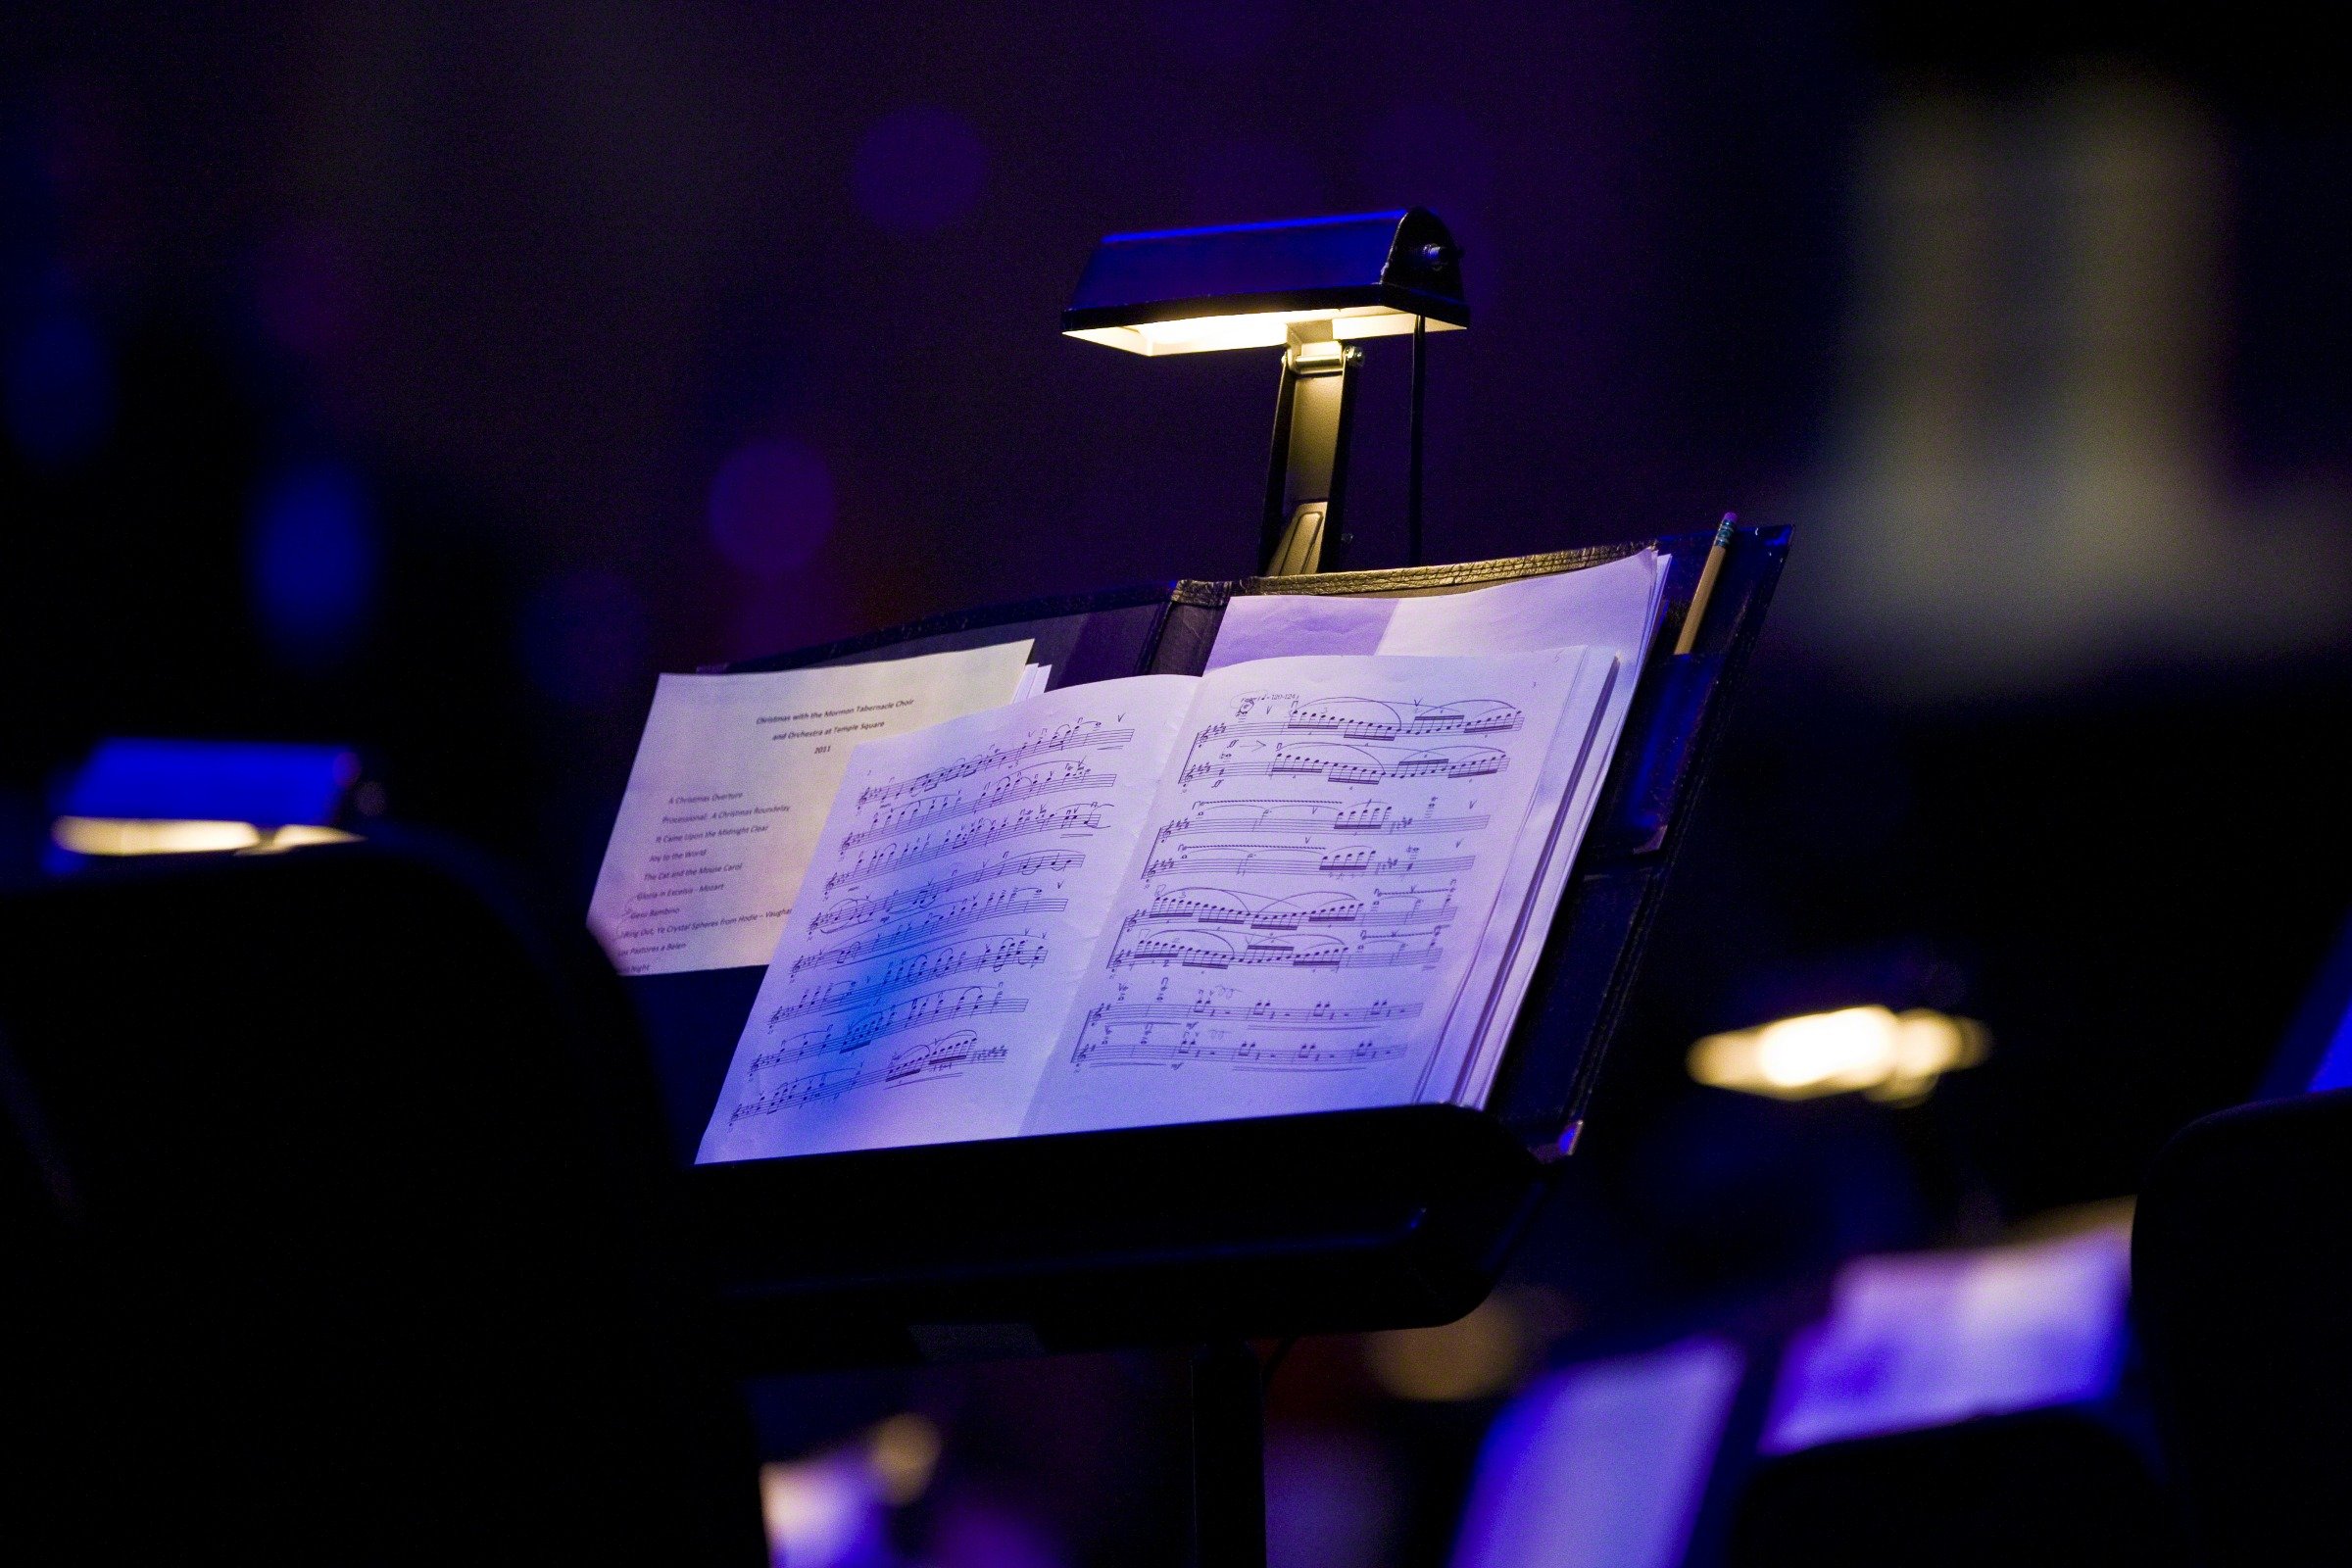 Music Stands and Lights